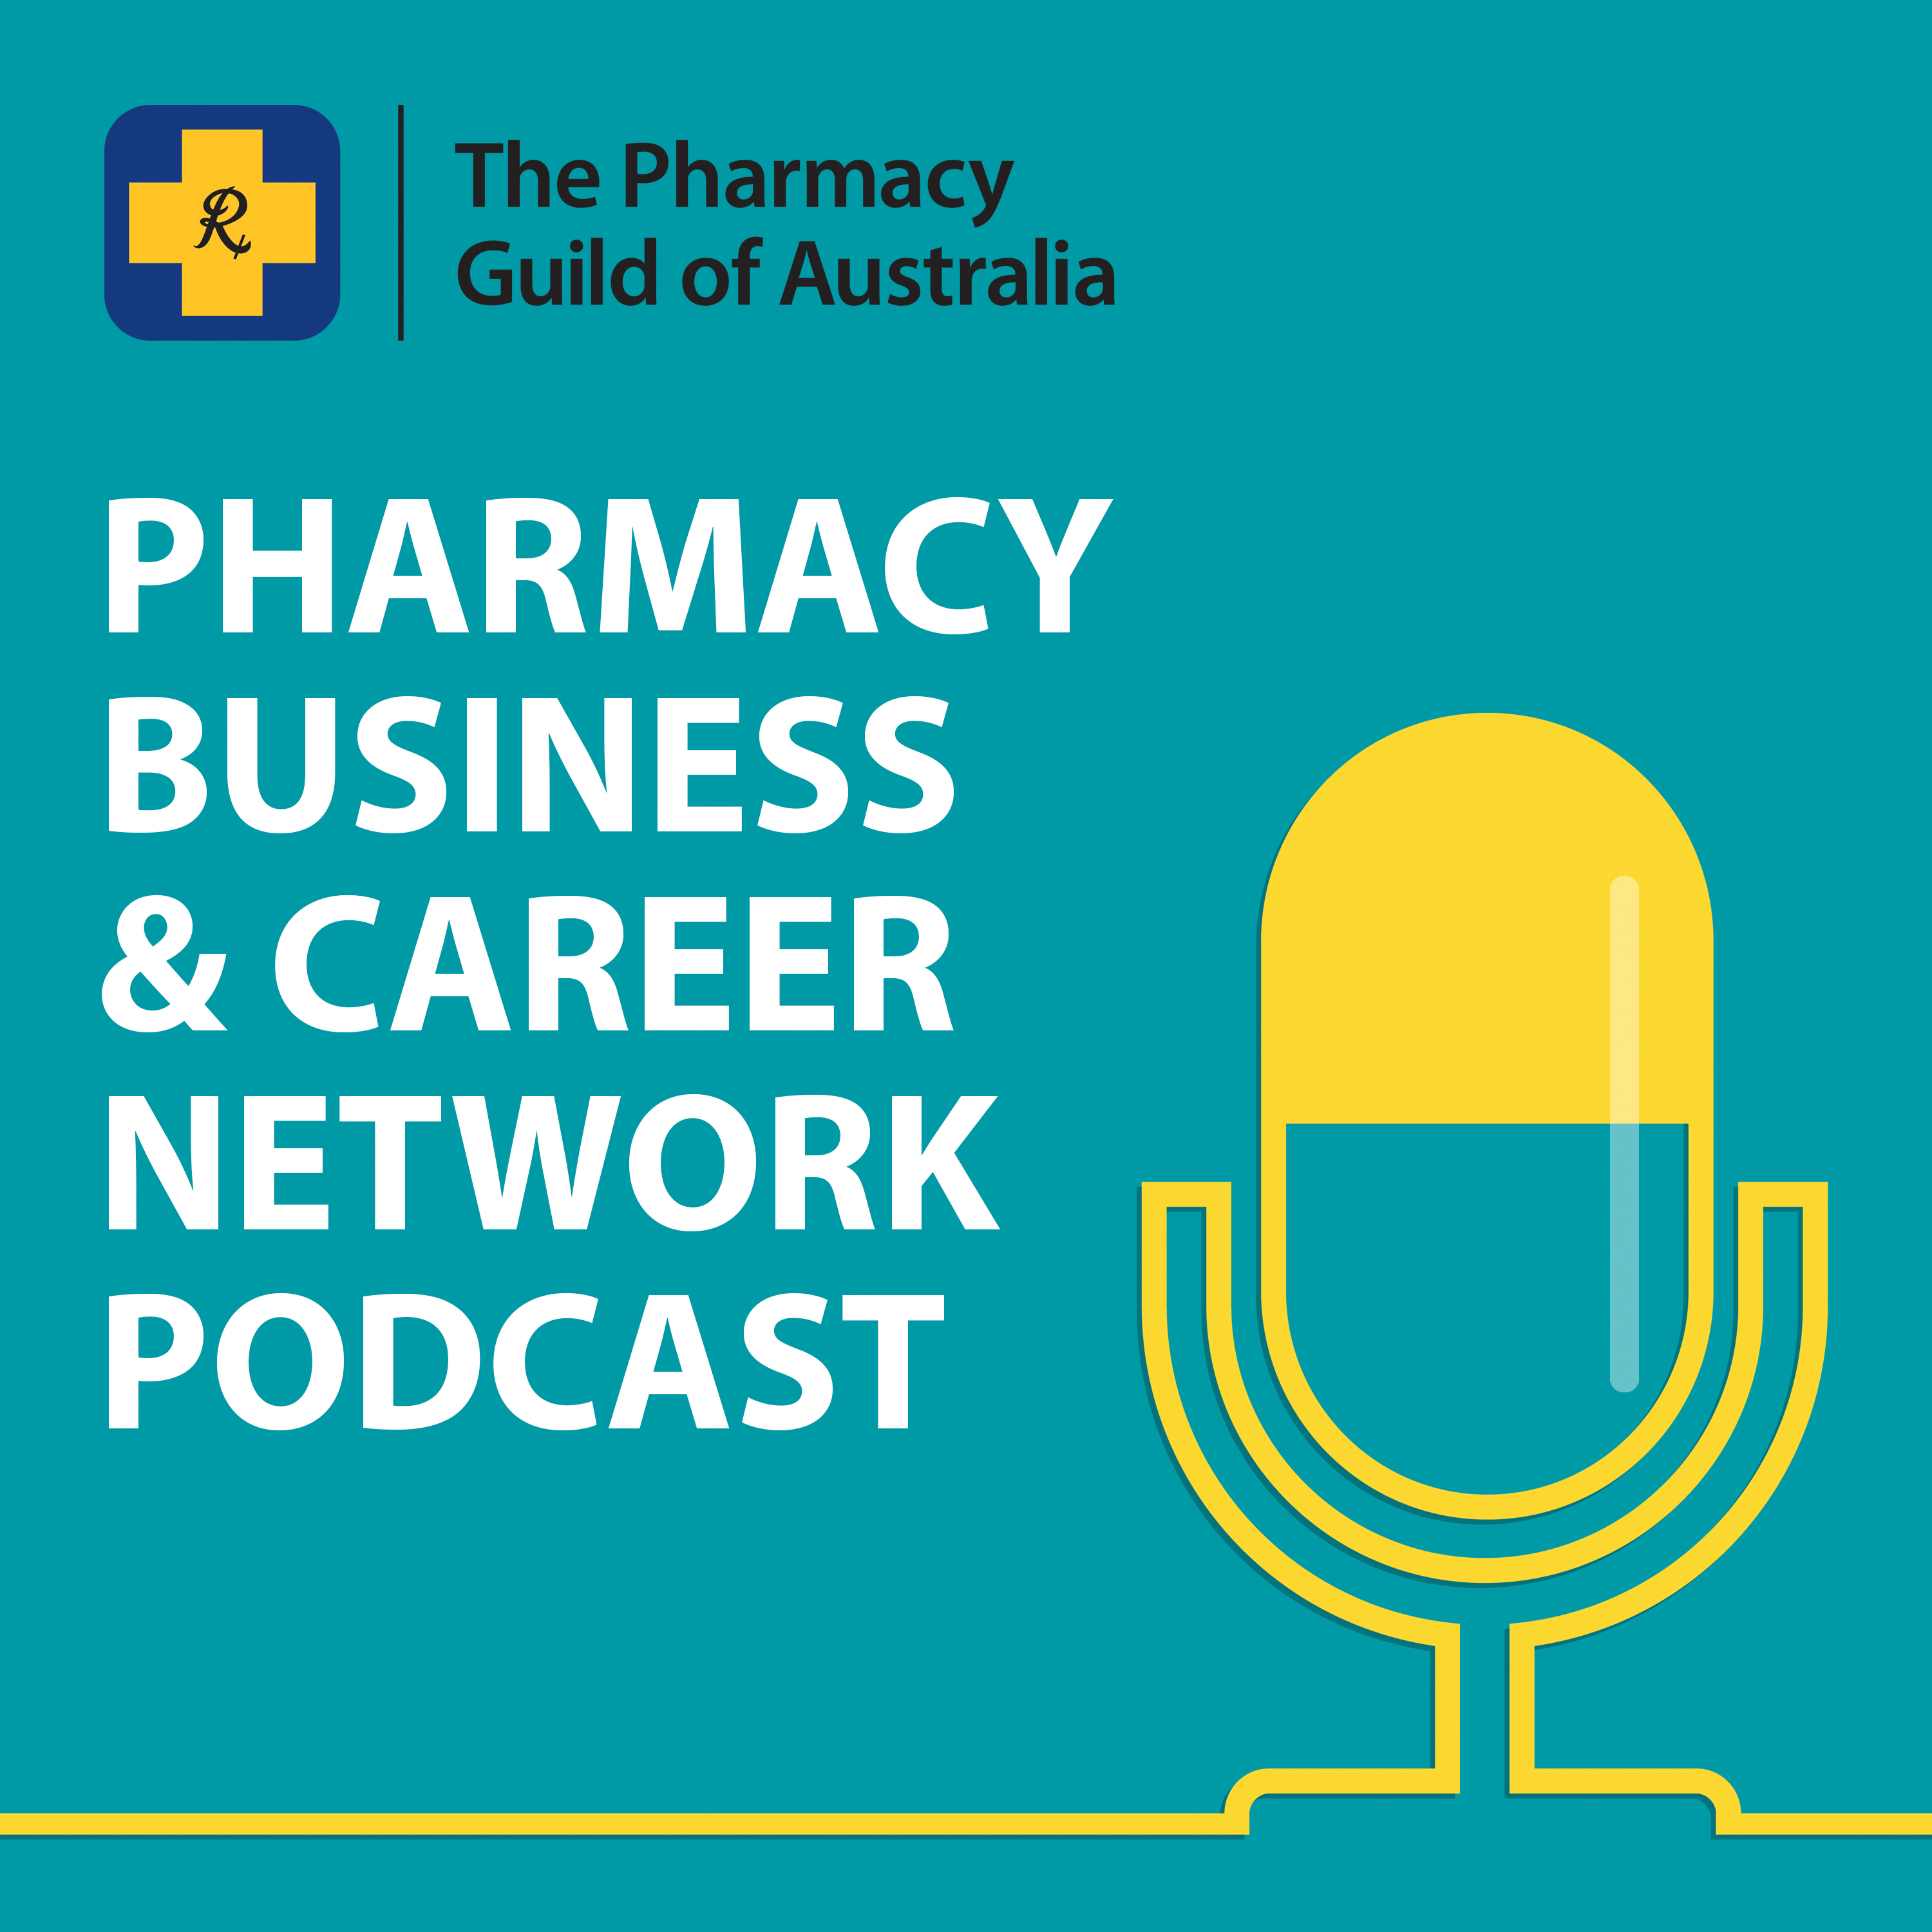 The Future Pharmacy Workforce – What Does it Look Like? - Helen O’Byrne - Ep 122